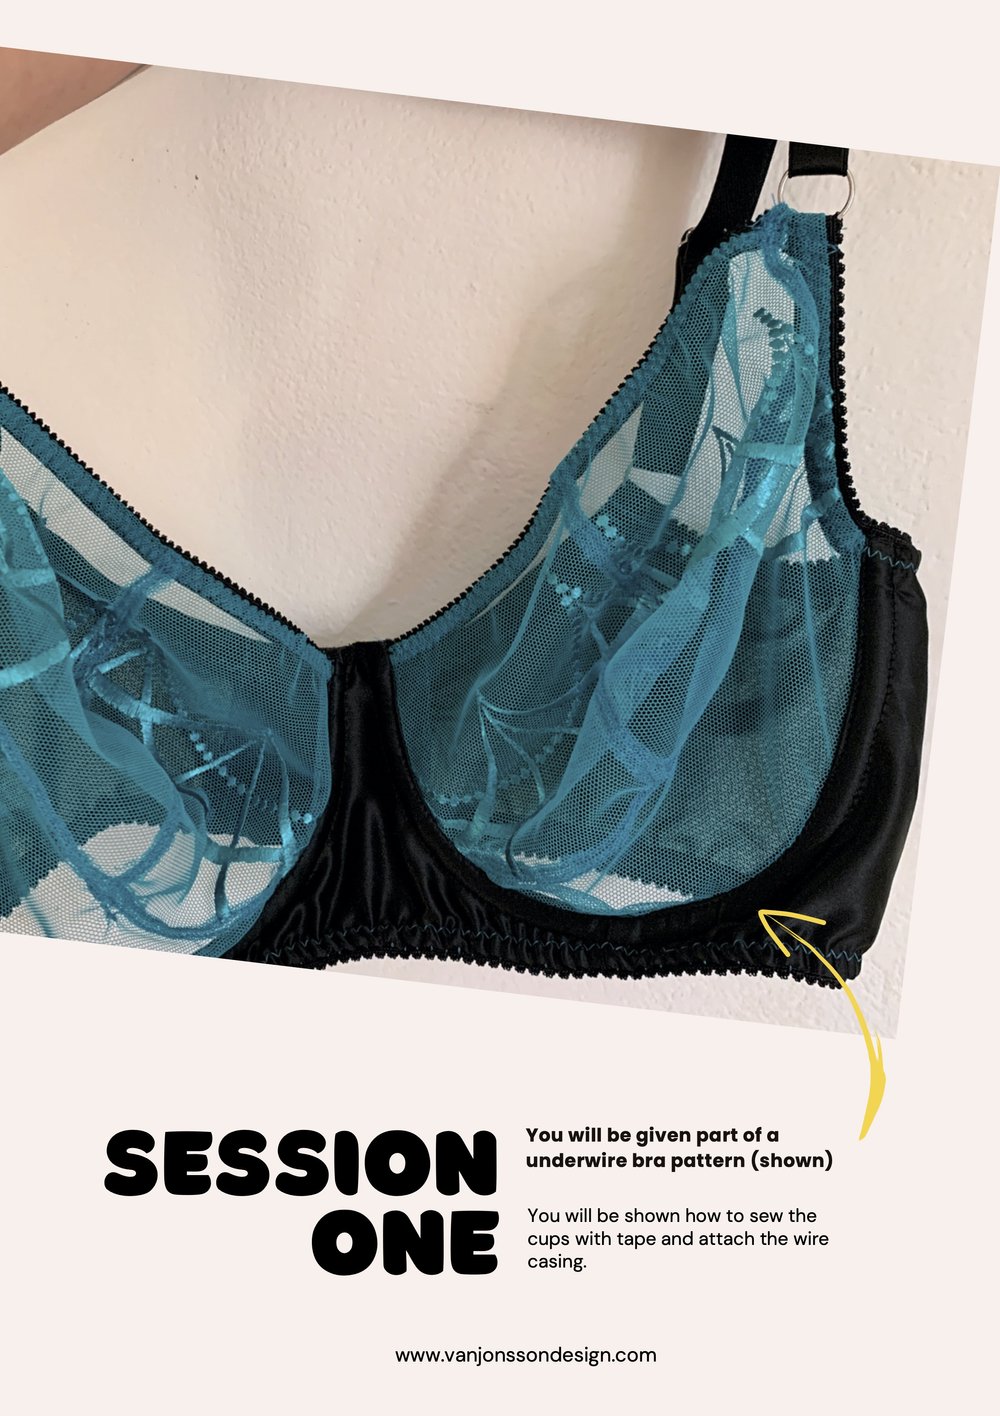 One- to -one : Designing and sewing an under wire bra — Van Jonsson Design